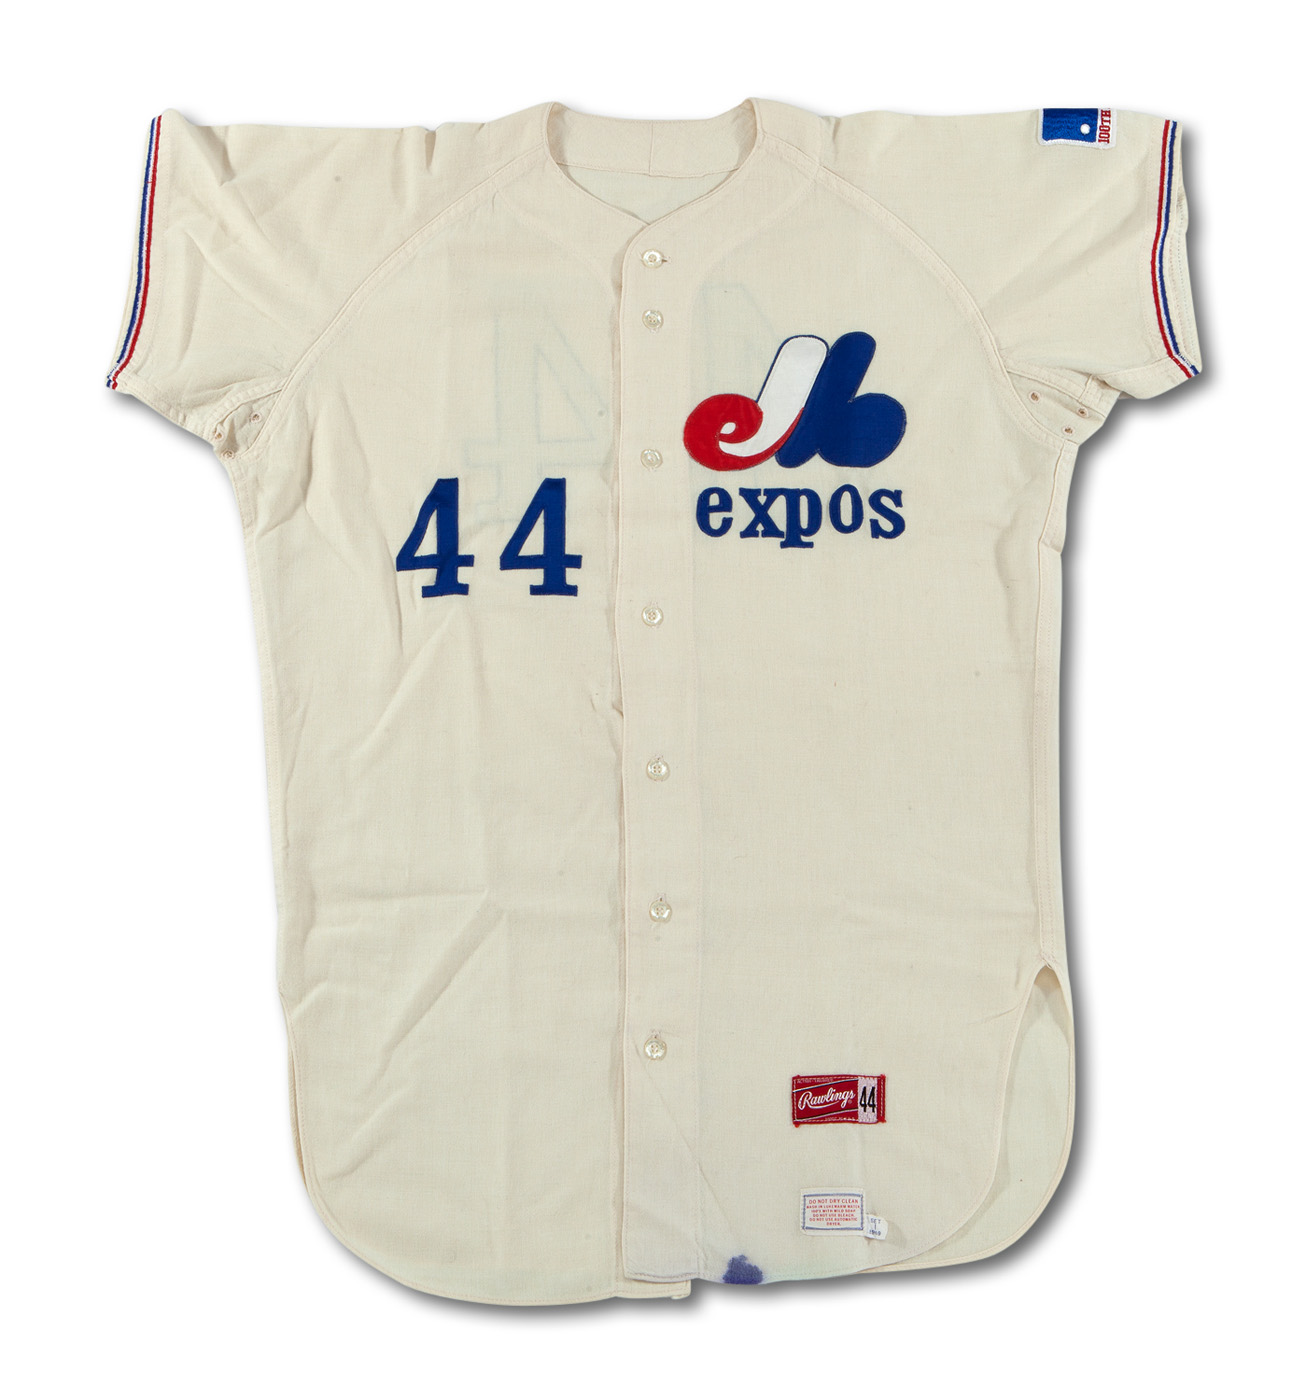 New Original Russell Athletic Montreal Expos Home Jersey Large L